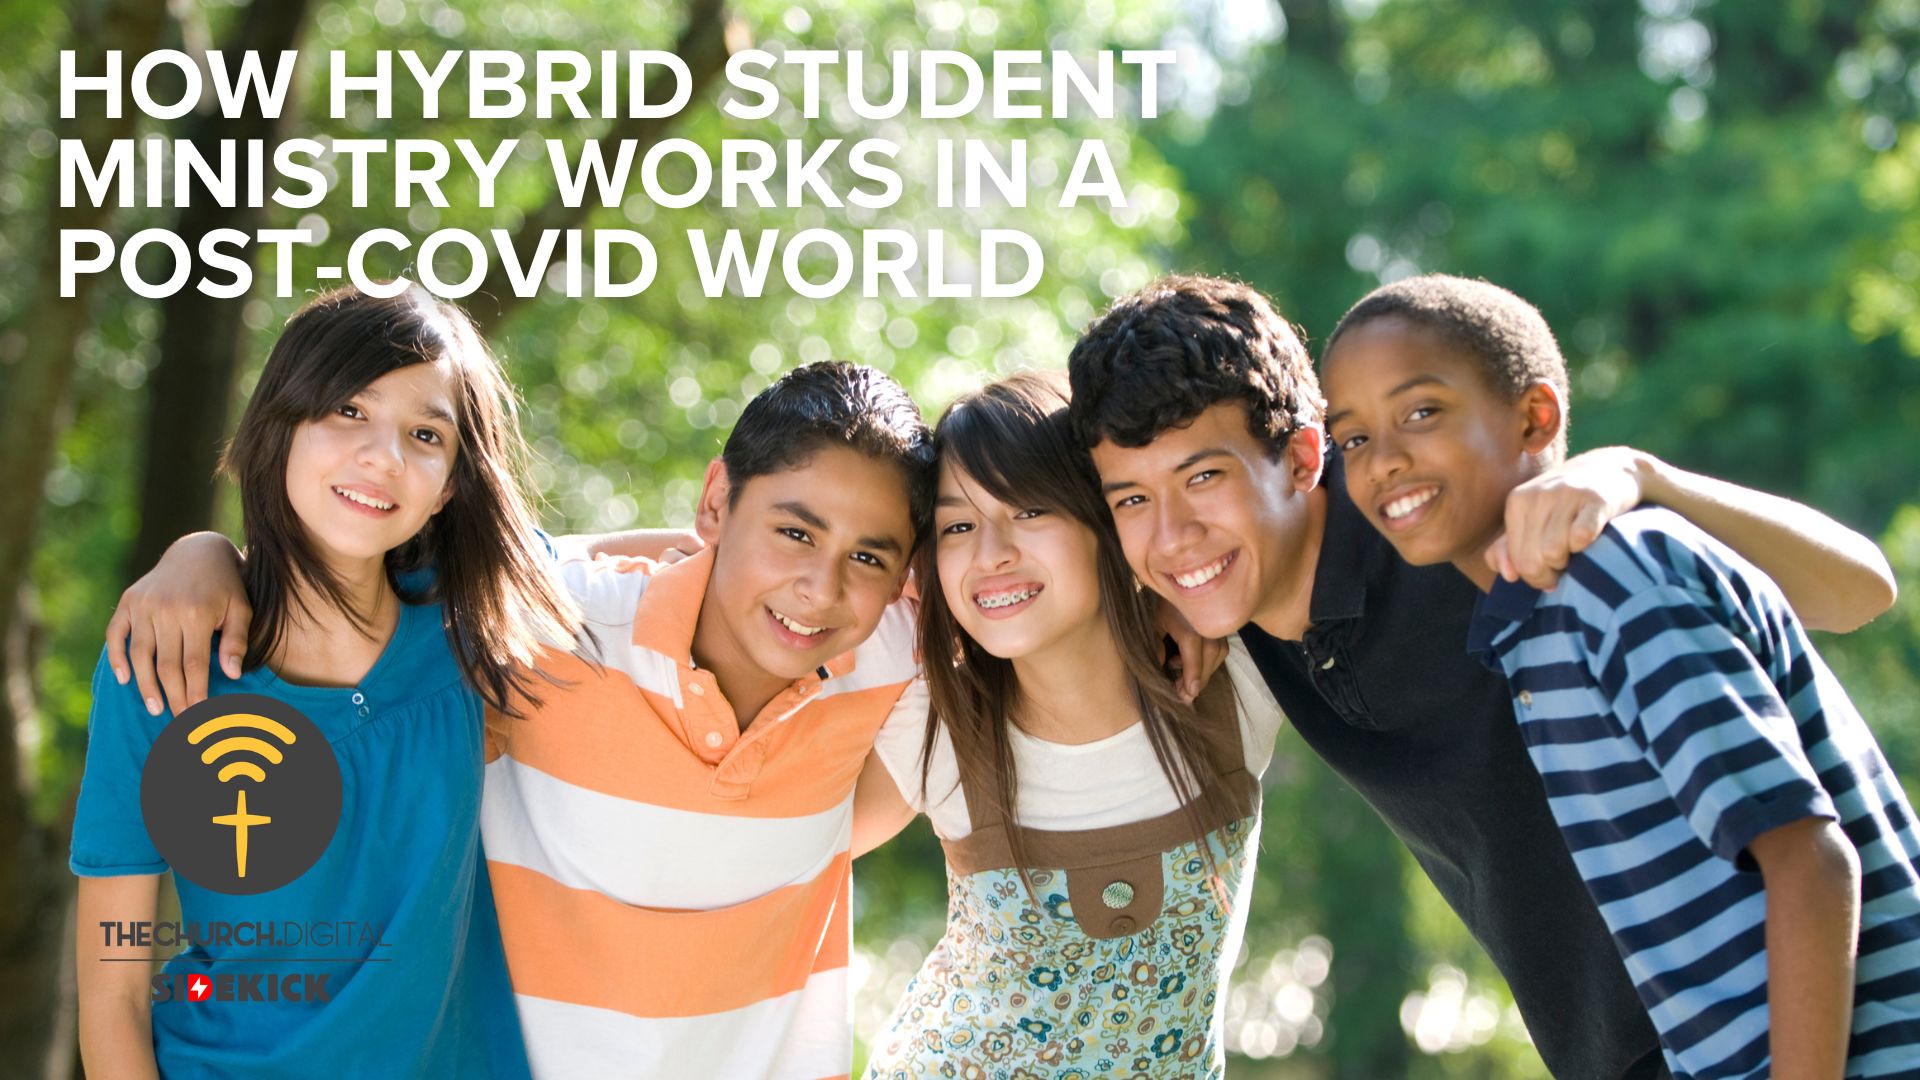 How Hybrid Student Ministry Works in a Post-Covid World